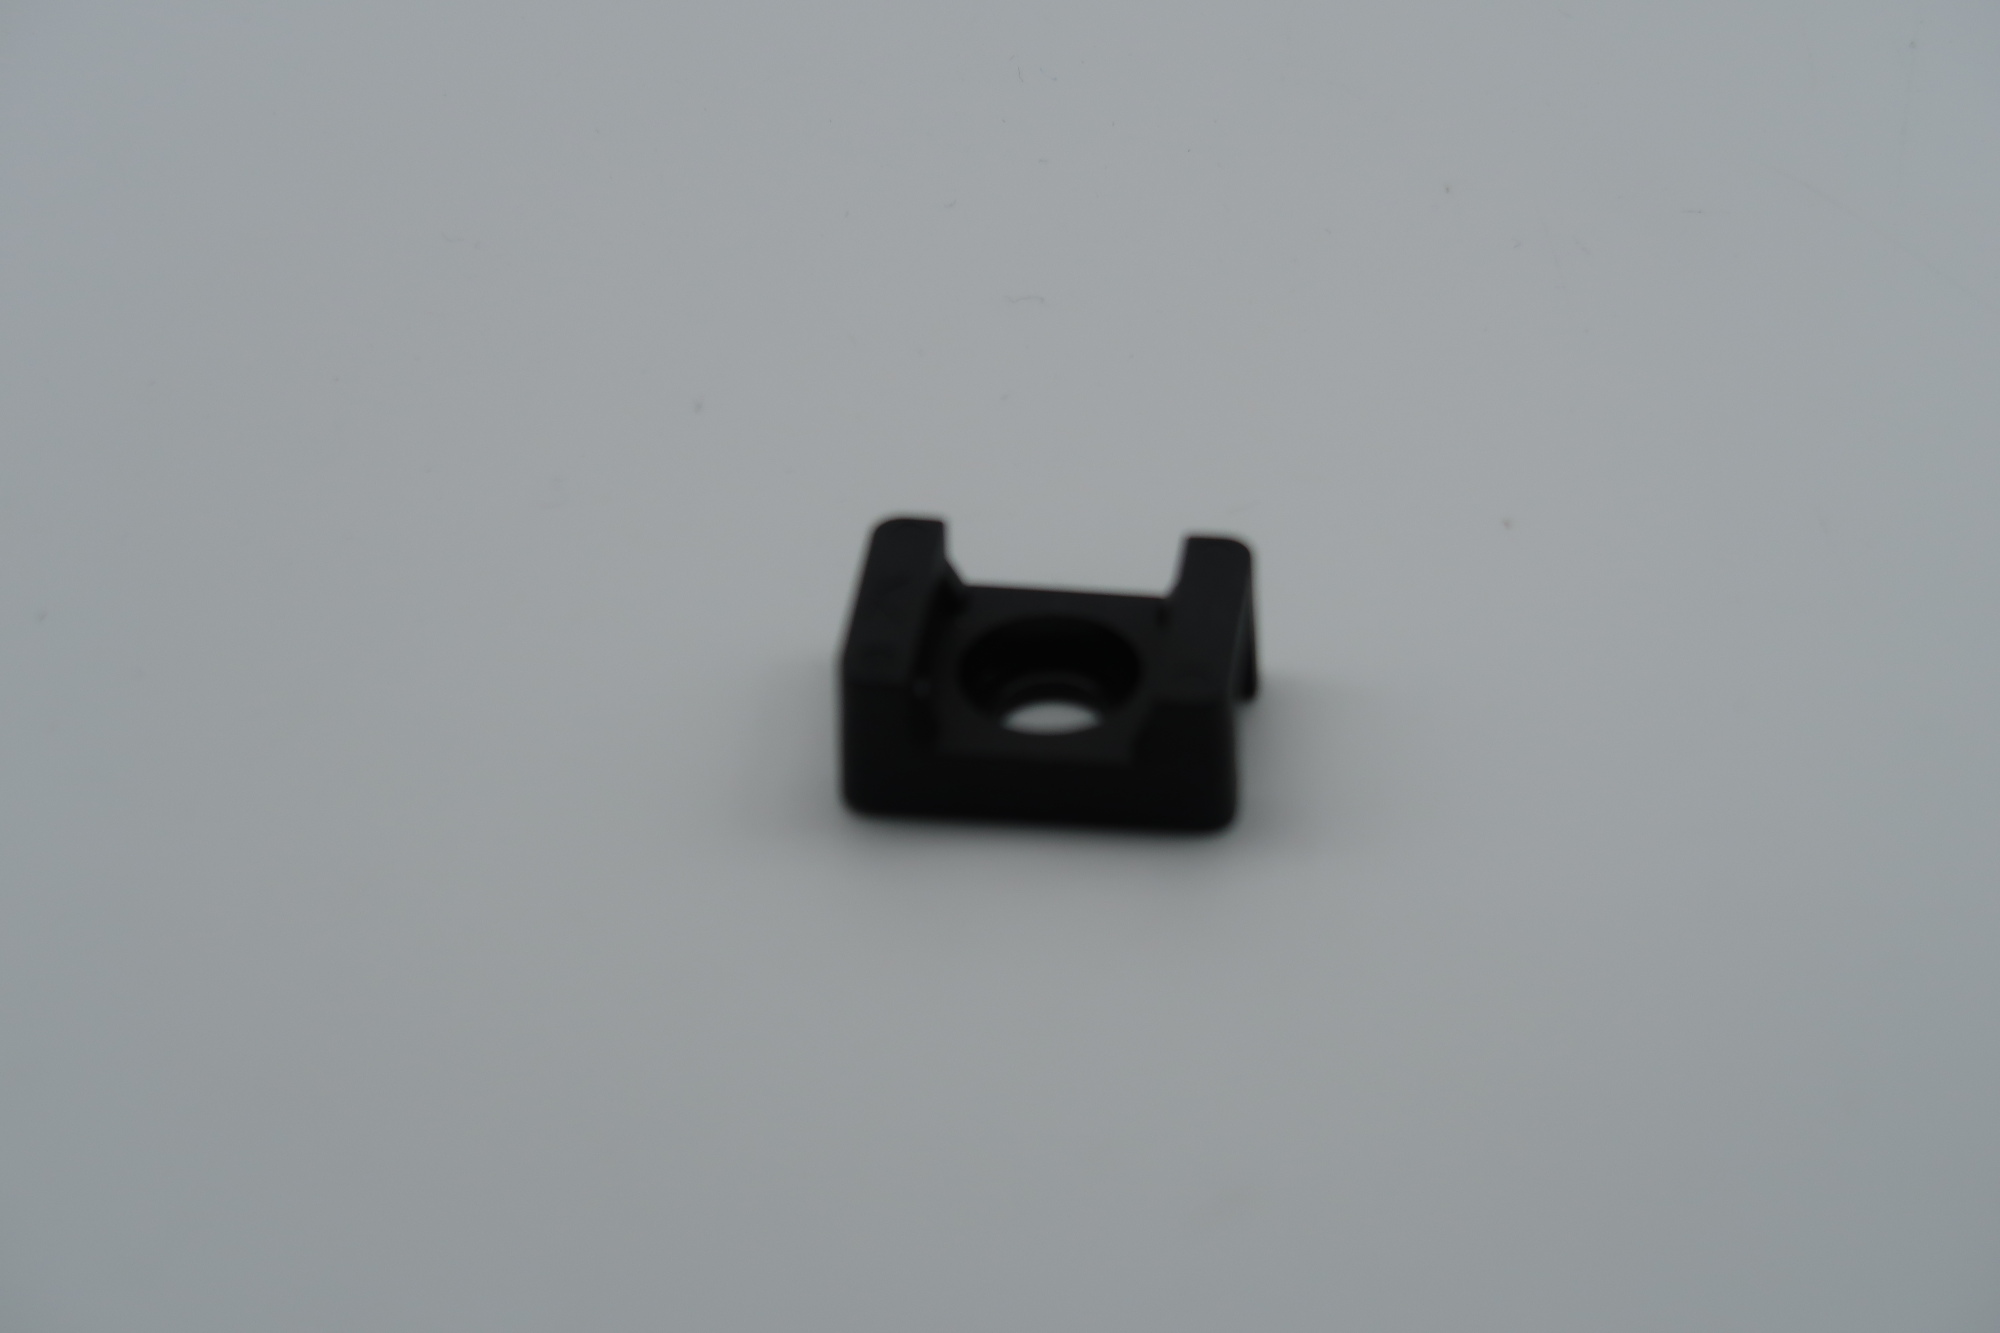 20mm x 14mm CABLE TIE MOUNT